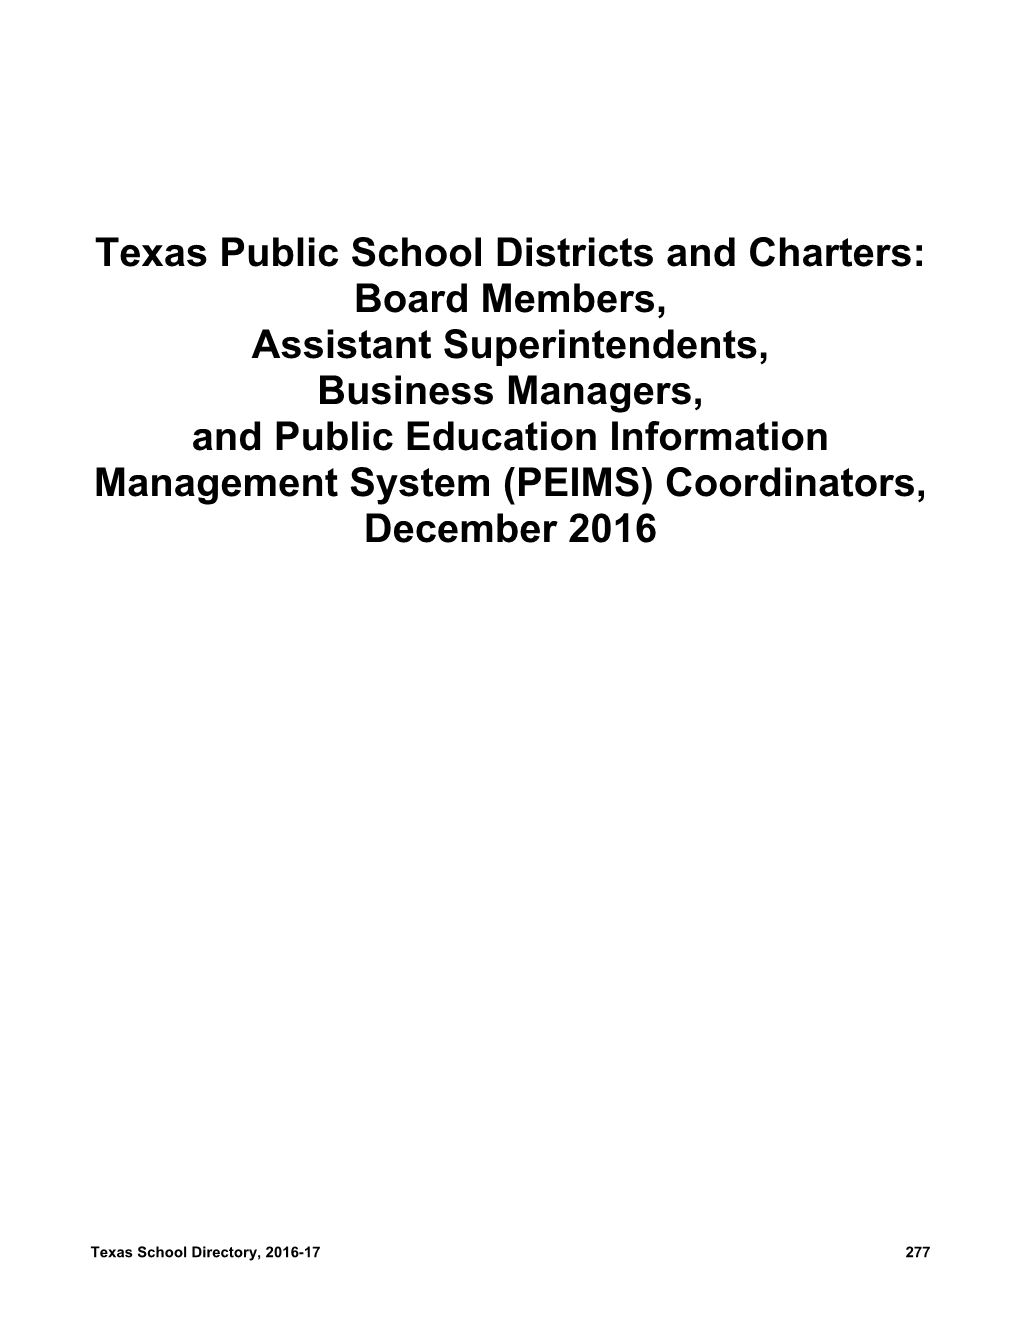 Texas Public School Districts and Charters: Board Members, Assistant